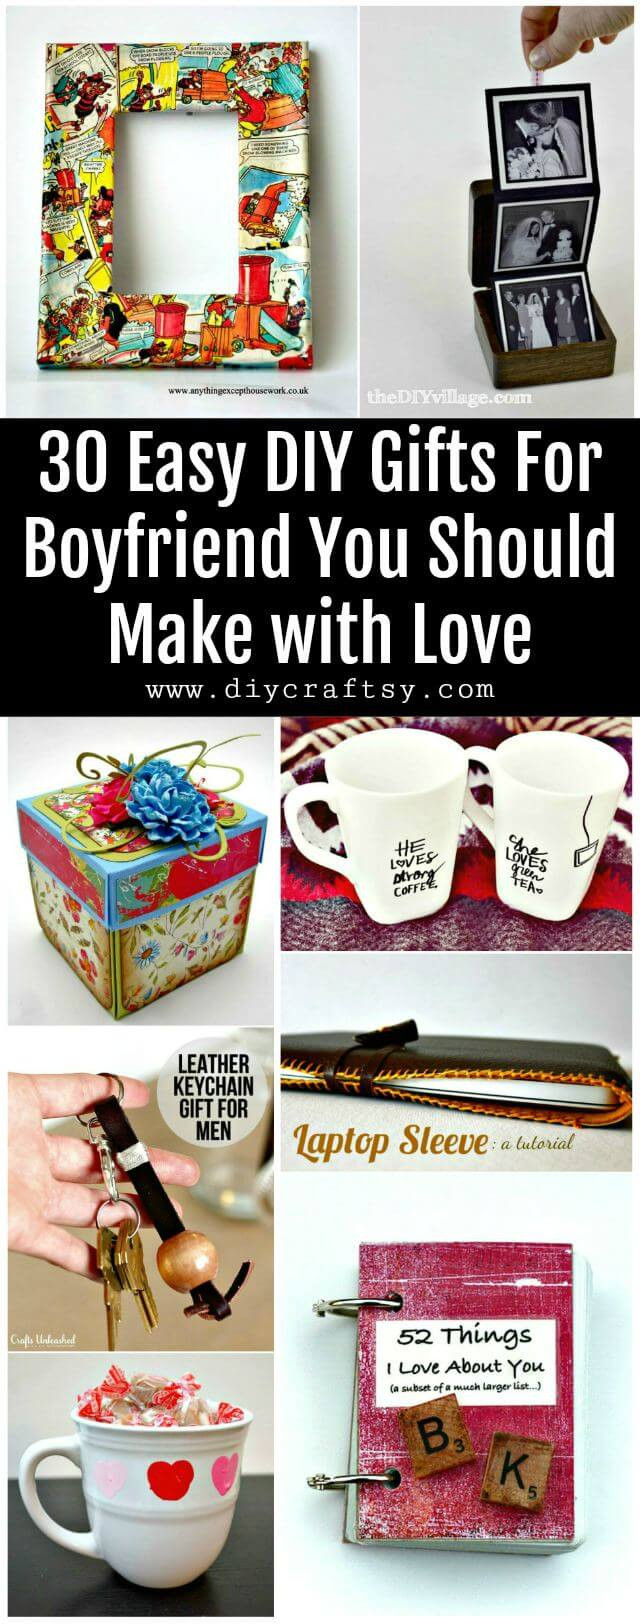 Gift Ideas For Your Boyfriend
 30 Easy DIY Gifts For Boyfriend You Should Make with Love